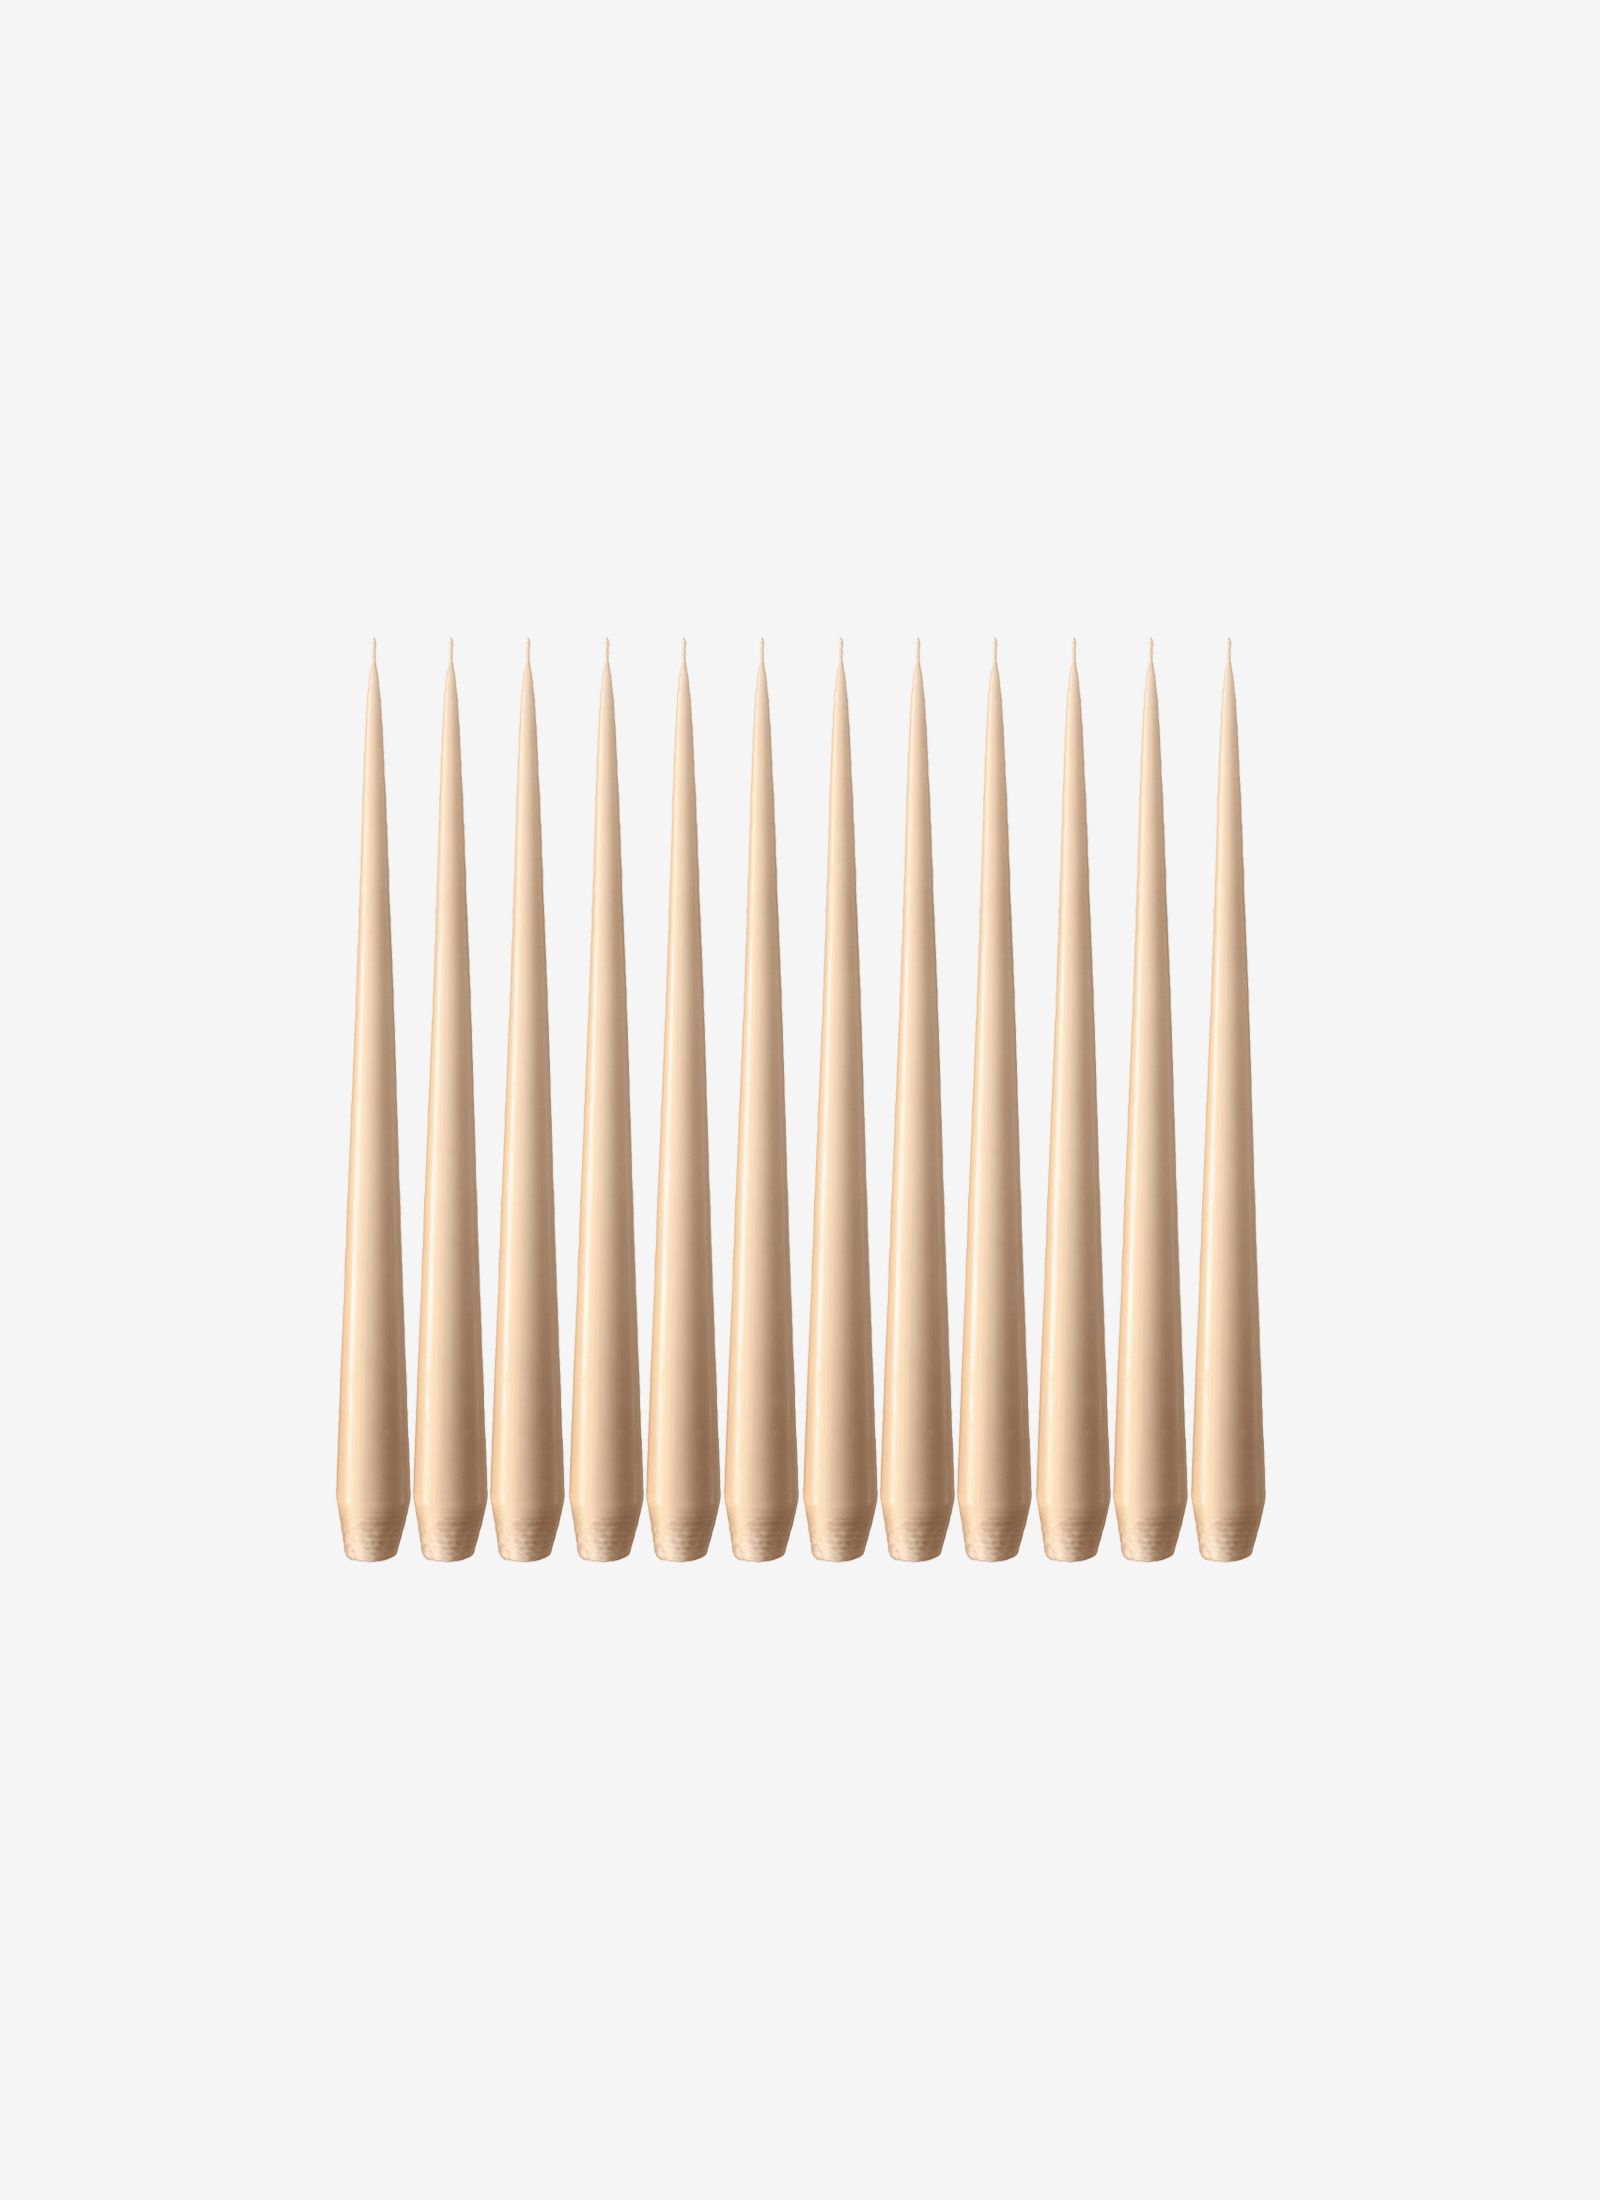 Case of 12 Tapered Candles in Nude #11 - 32cm